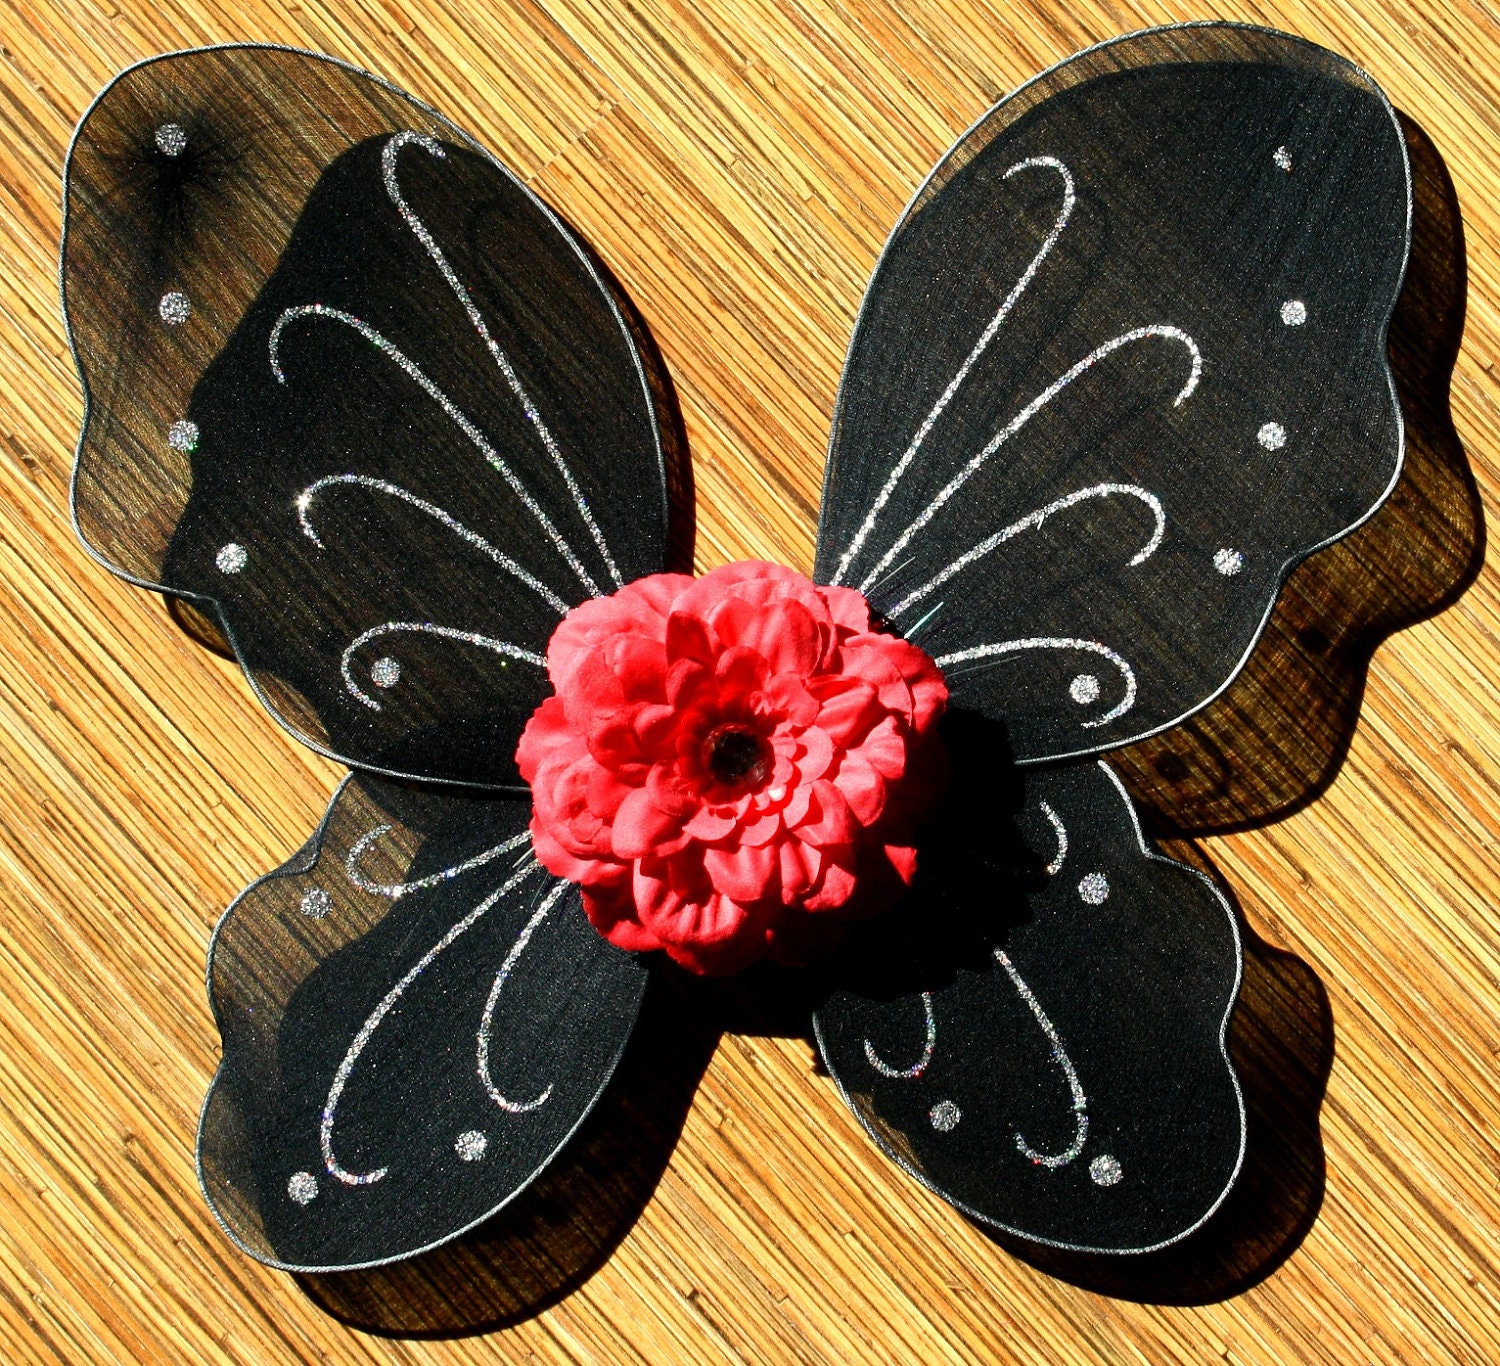 Black Butterfly Wings with Red Dahlia - myuberlicious